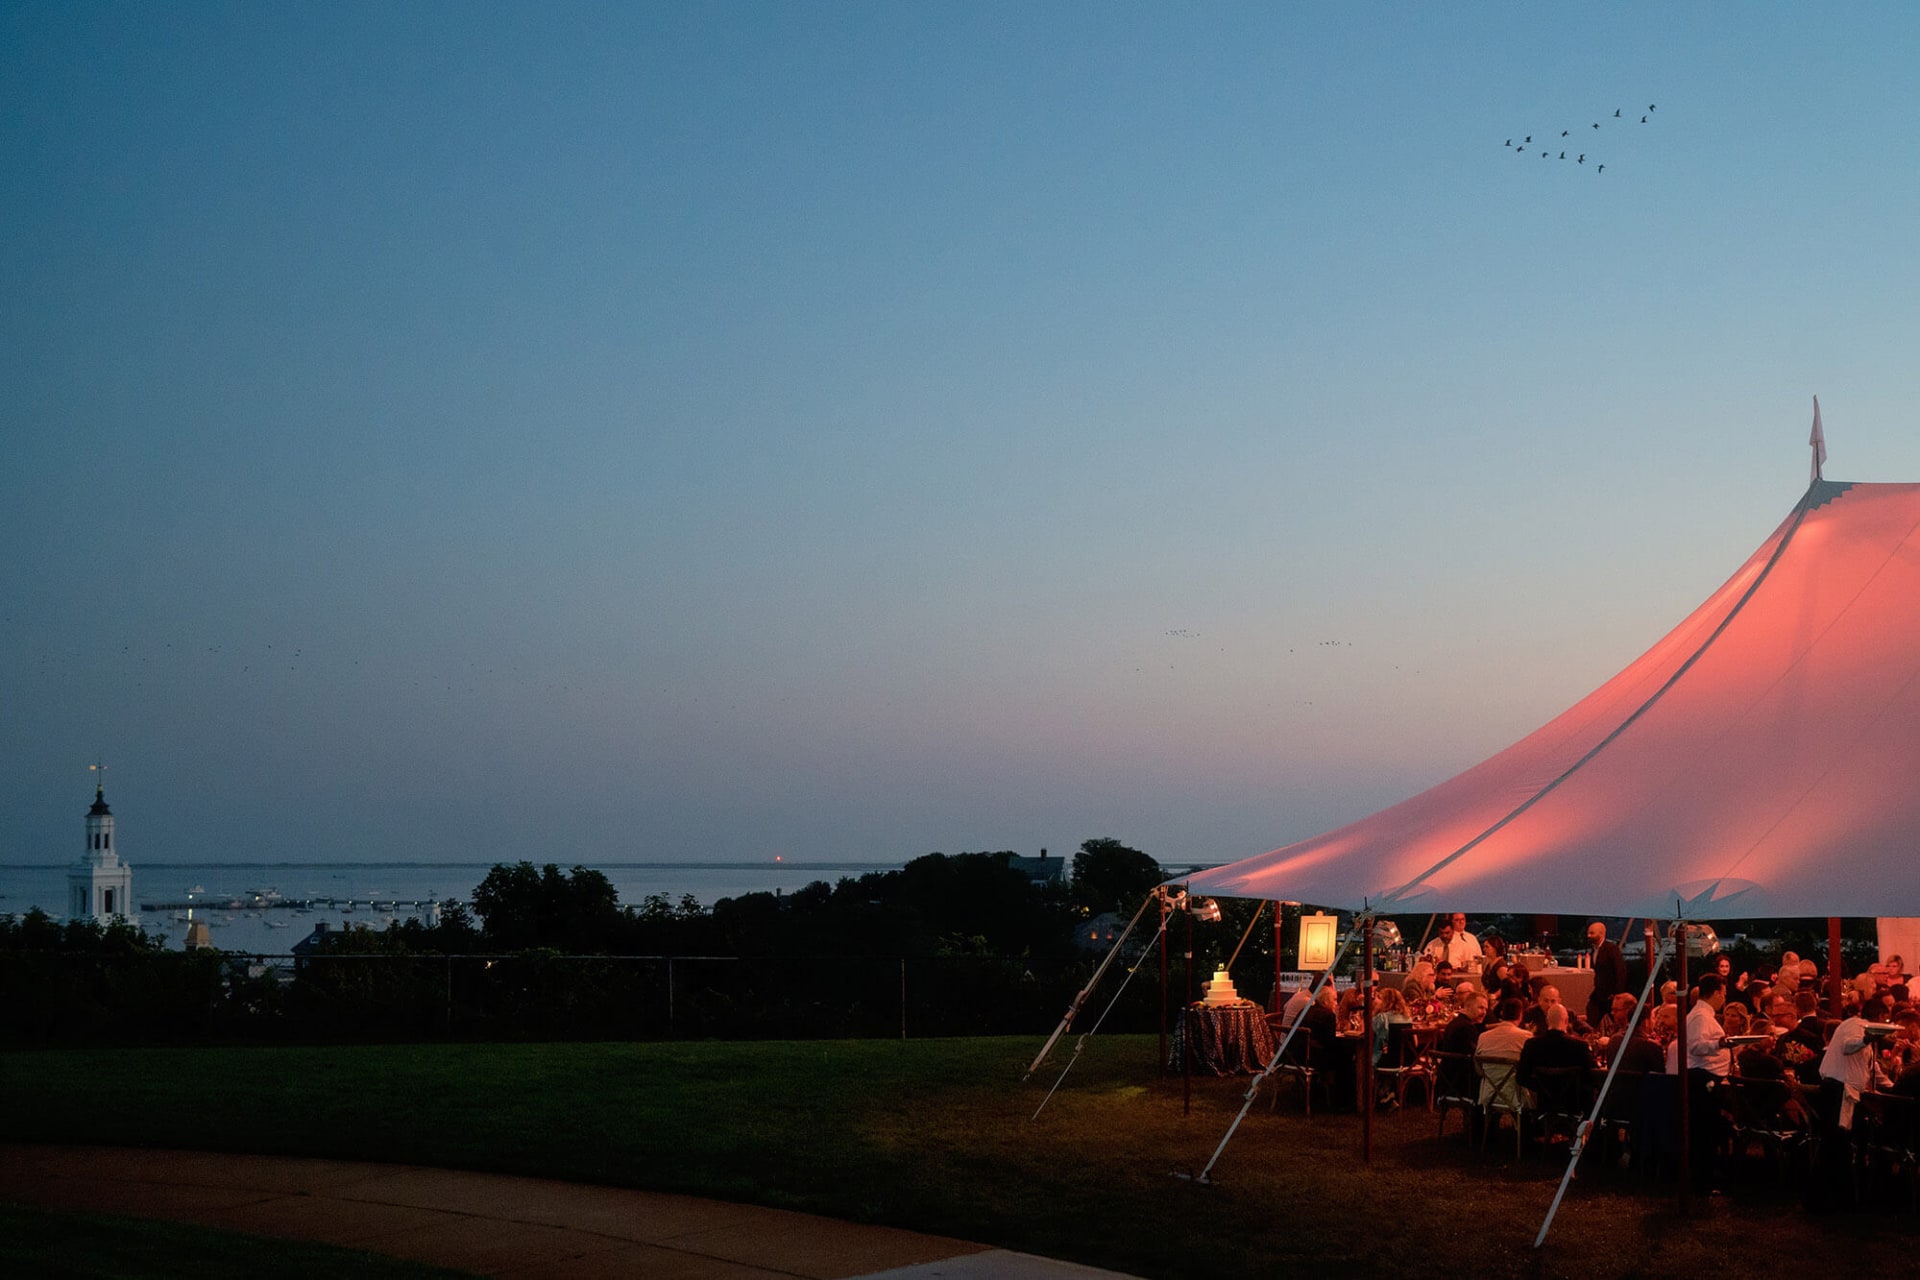 Provincetown Monument Wedding tent at night with view over P-Town